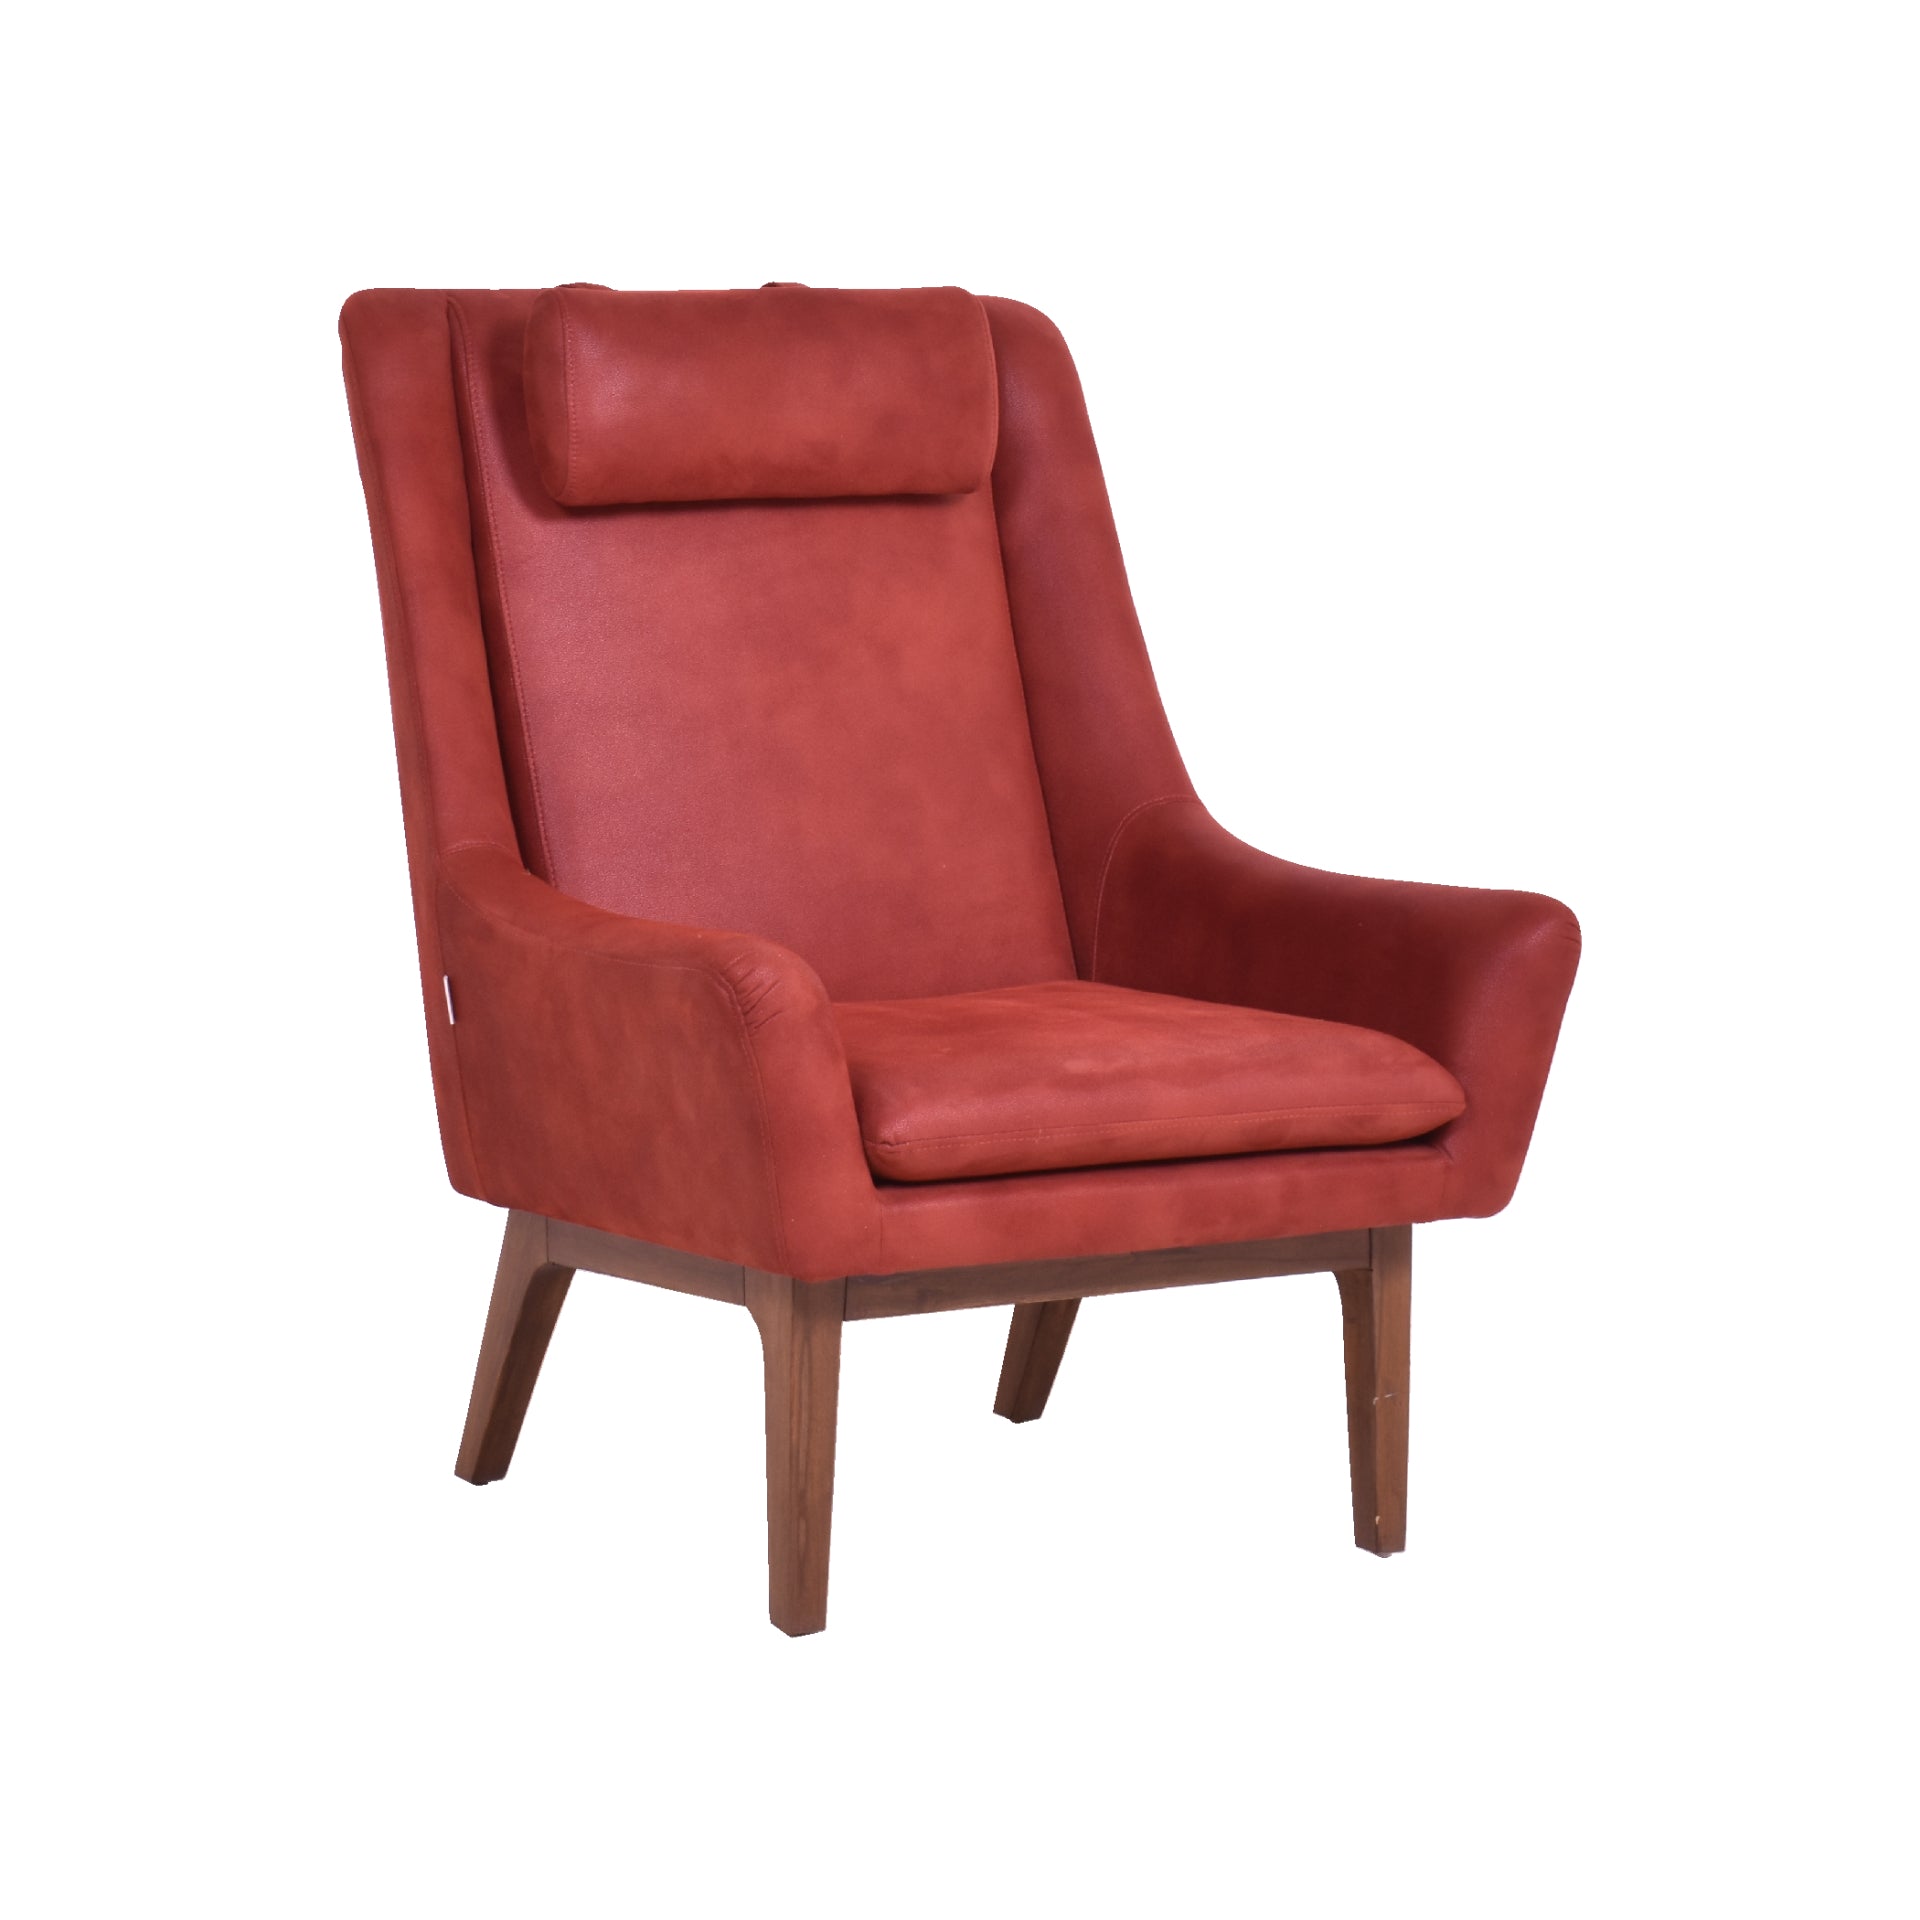 ARENA DERBY Single Seater Lounger Chair Polyester  (Rust)